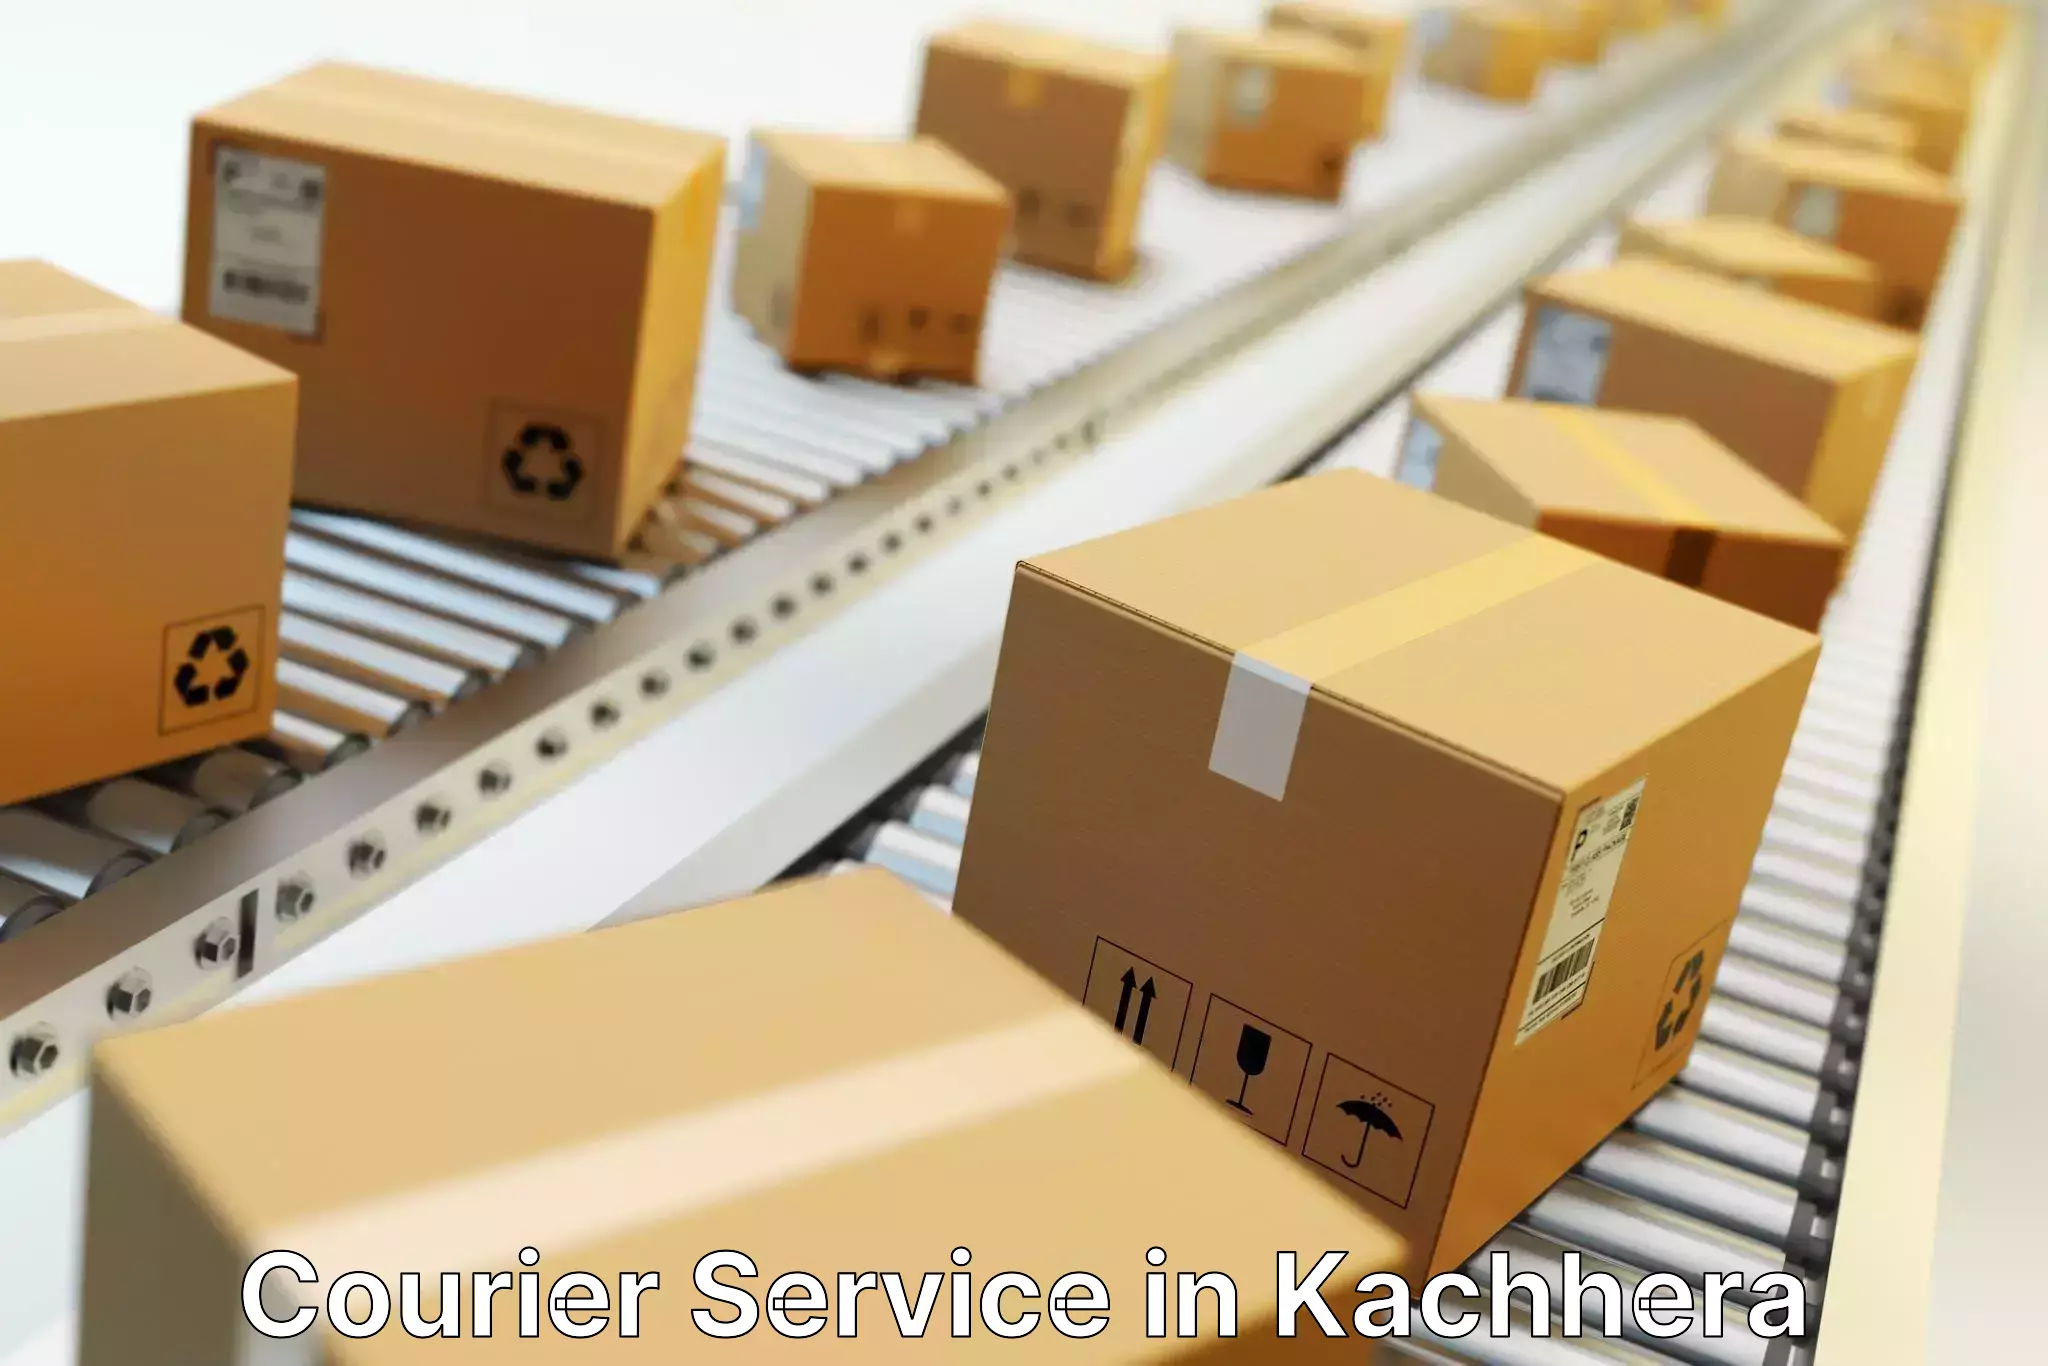 Courier services in Kachhera